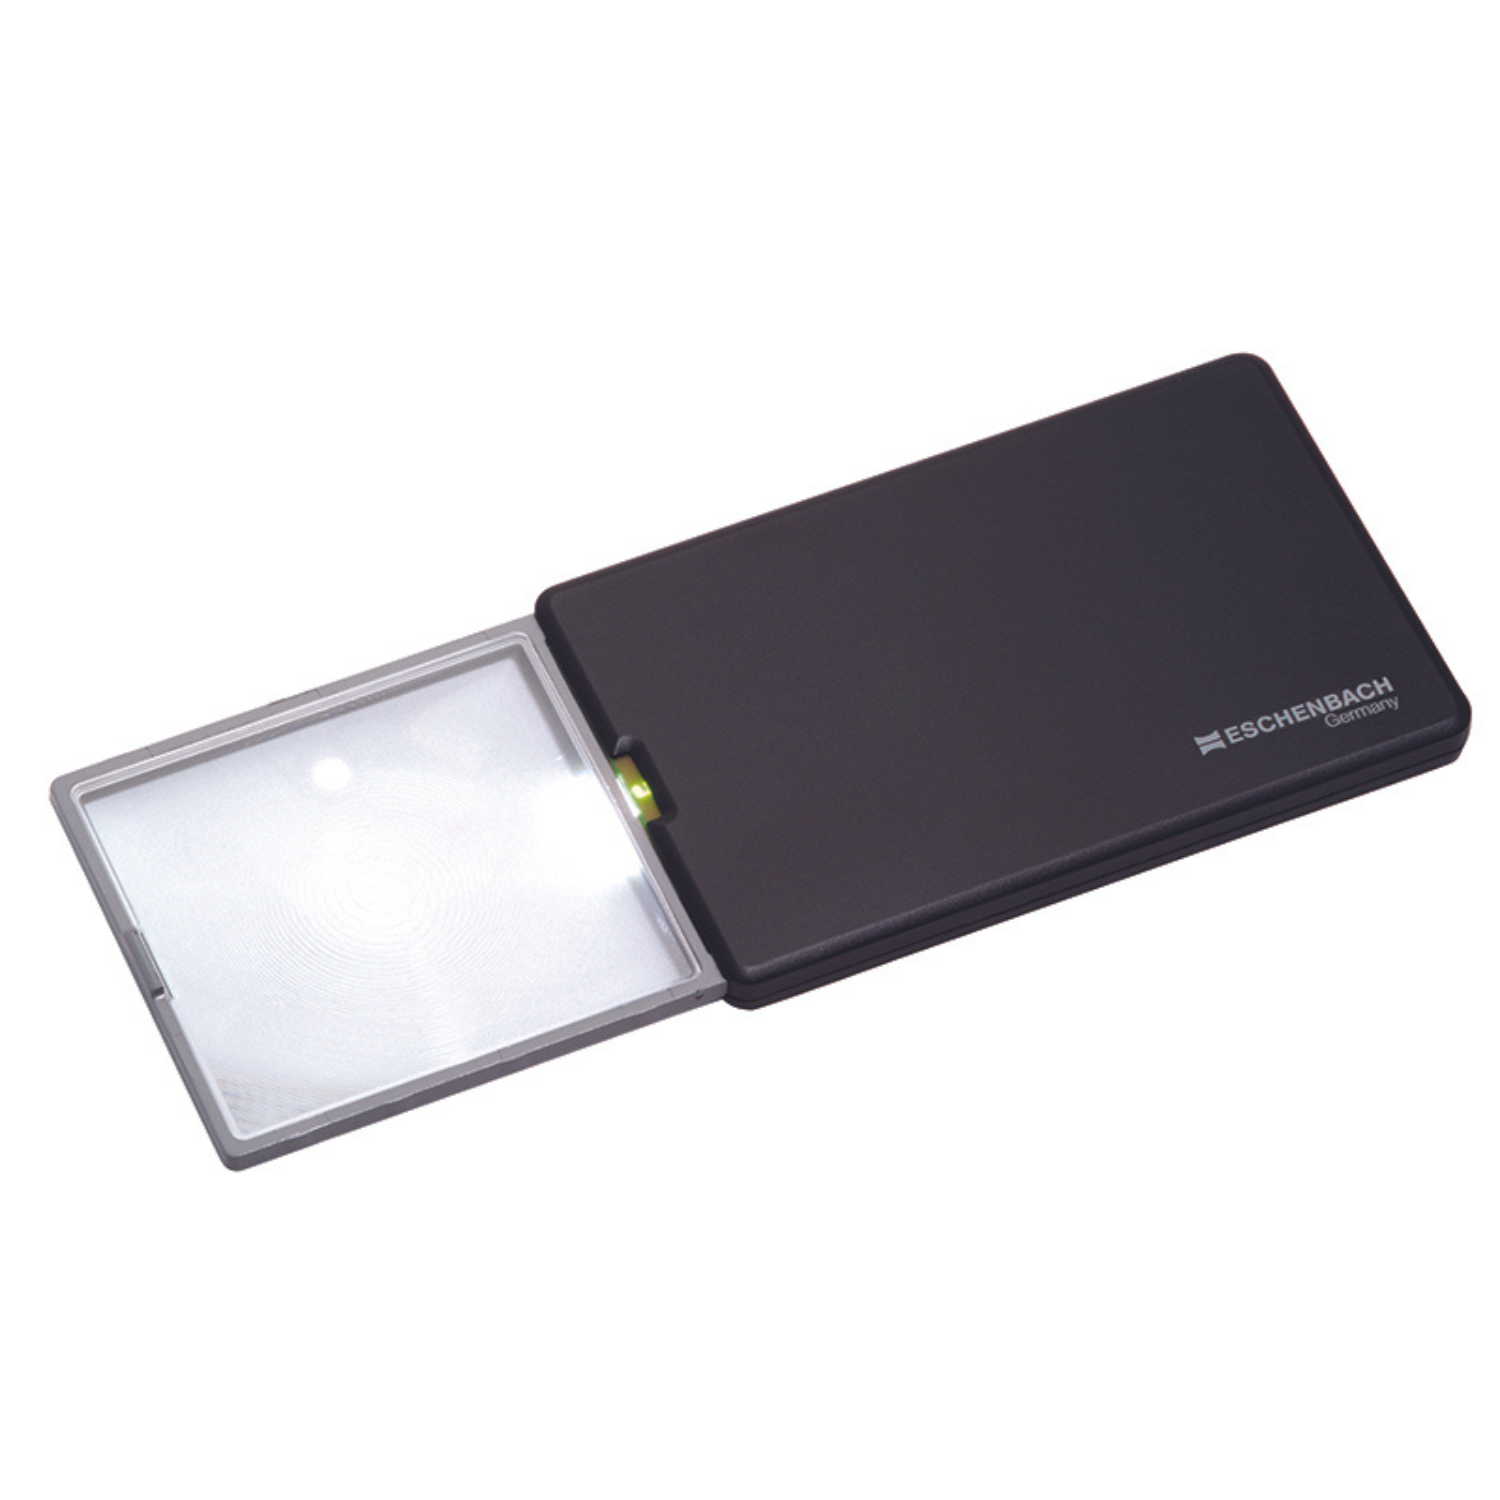 Image of black EasyPOCKET 3x LED pocket magnifier from Eschenbach.